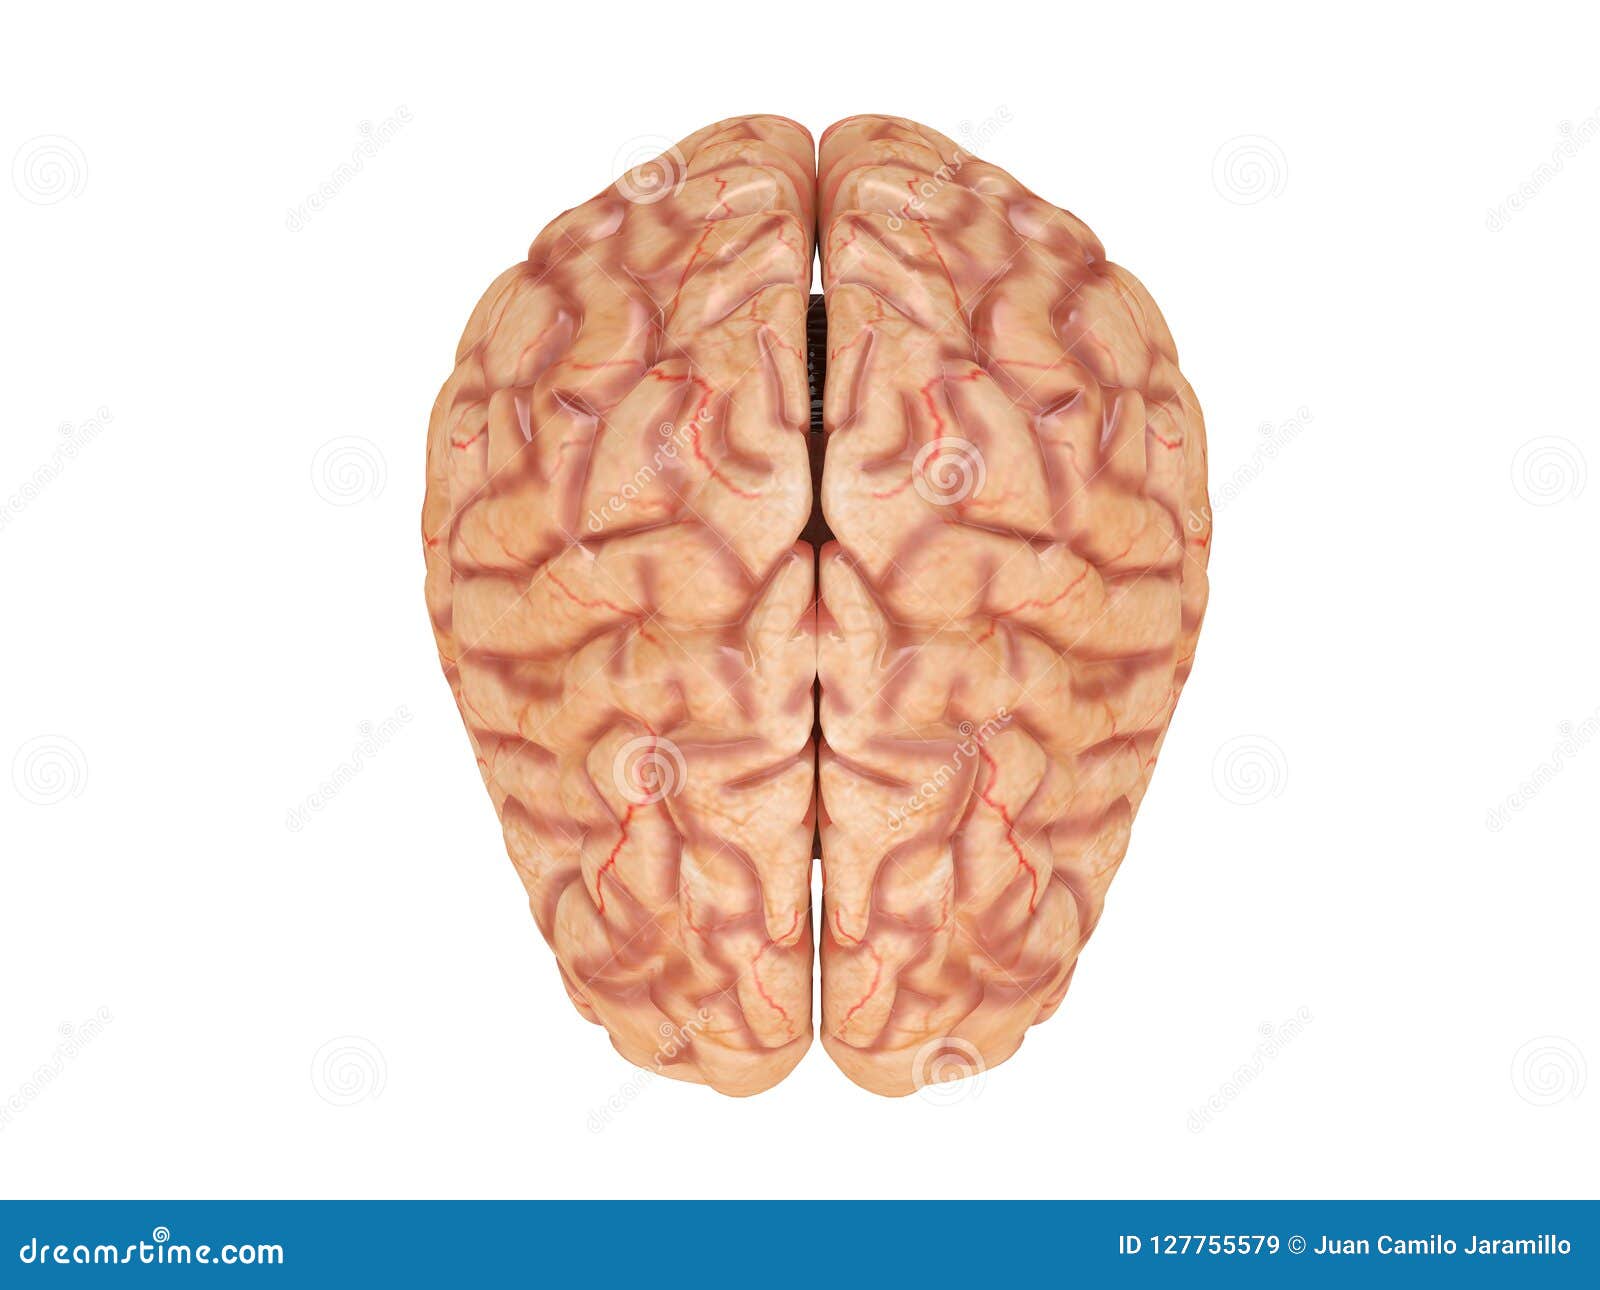 realistic brain from side or front view  on a white background 3d rendering